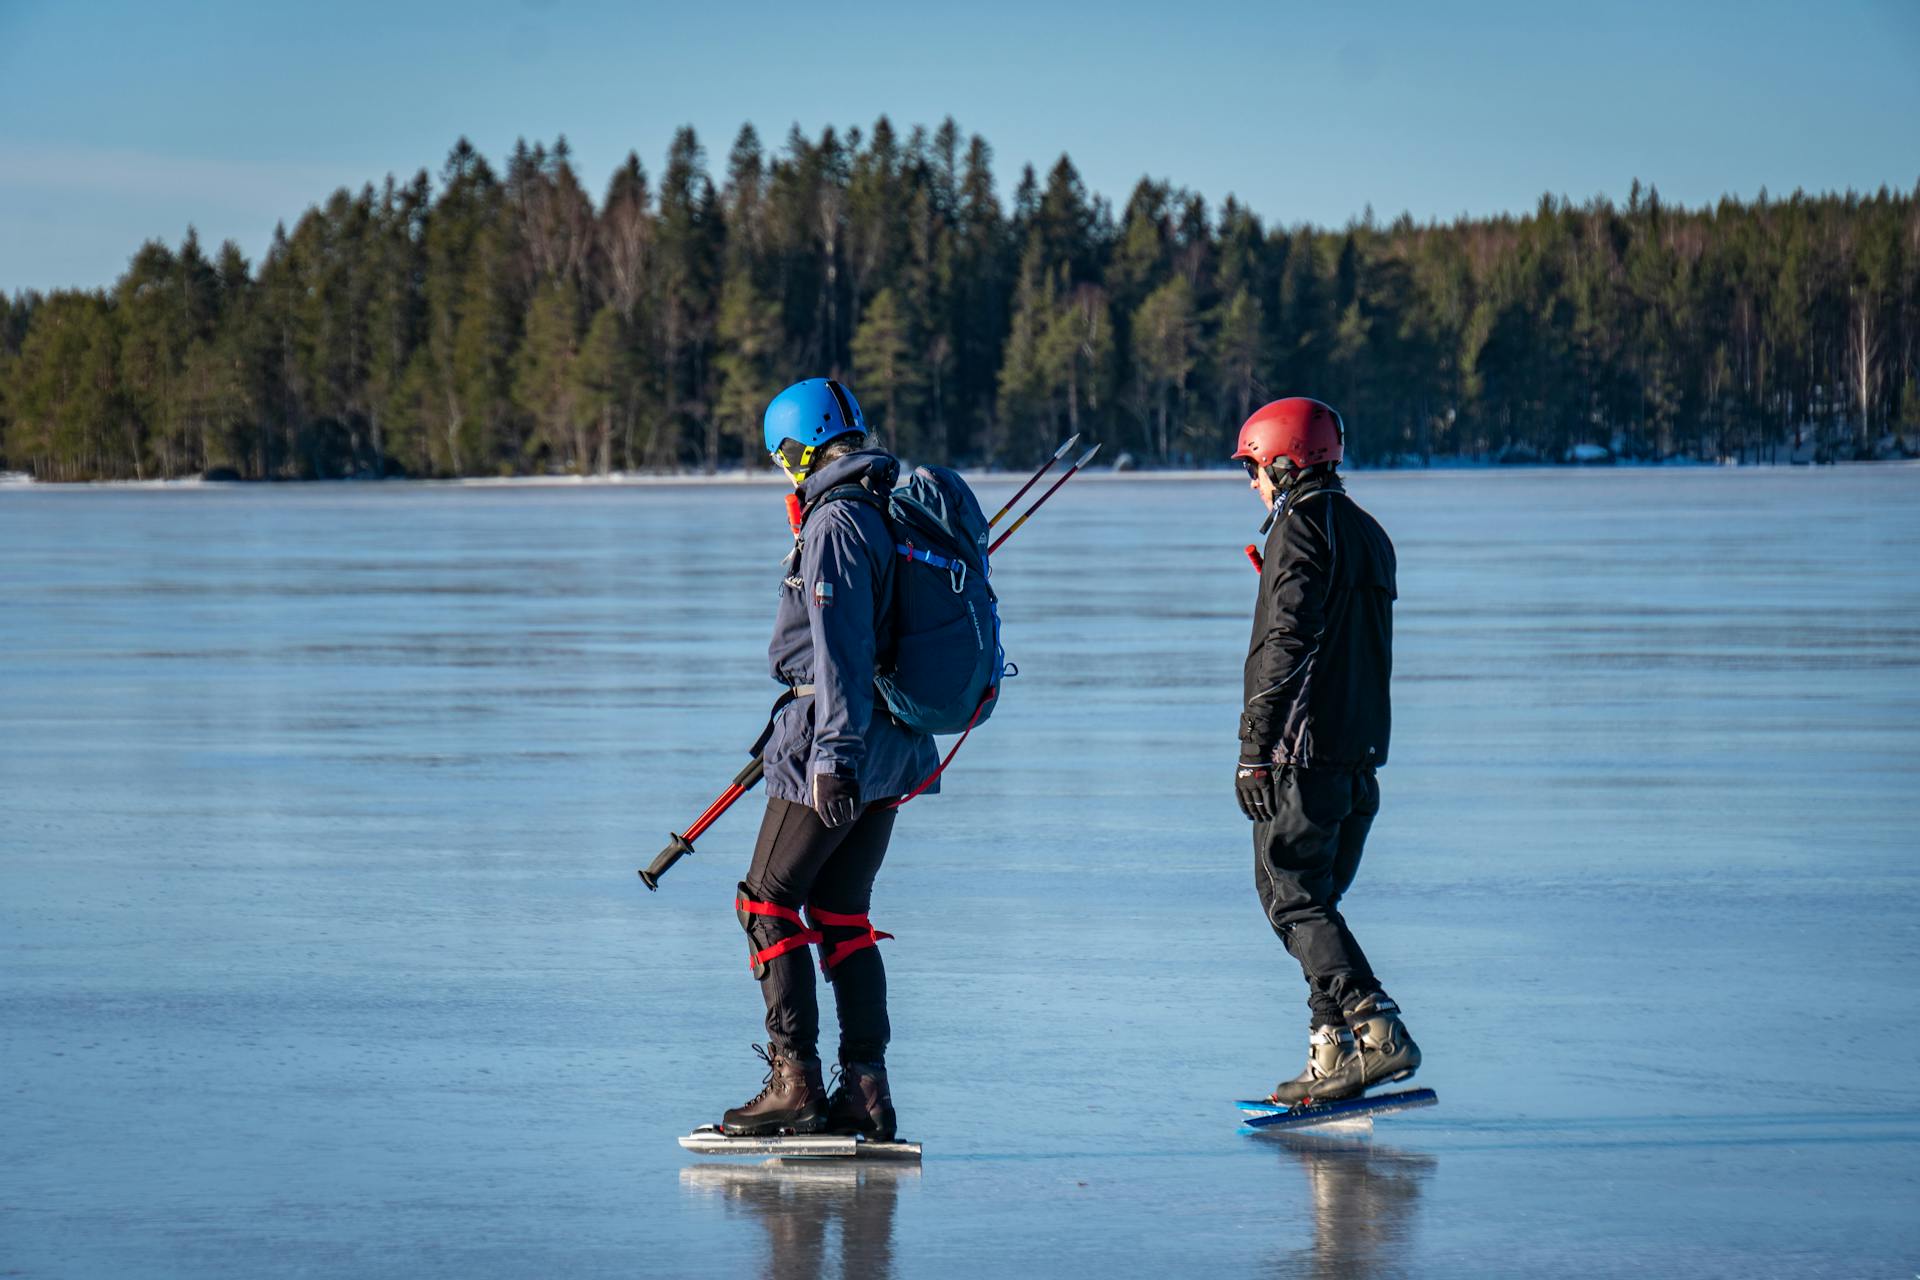 A ice skating duo up close during a guided ice skating tour with blue sky and ice in the background.